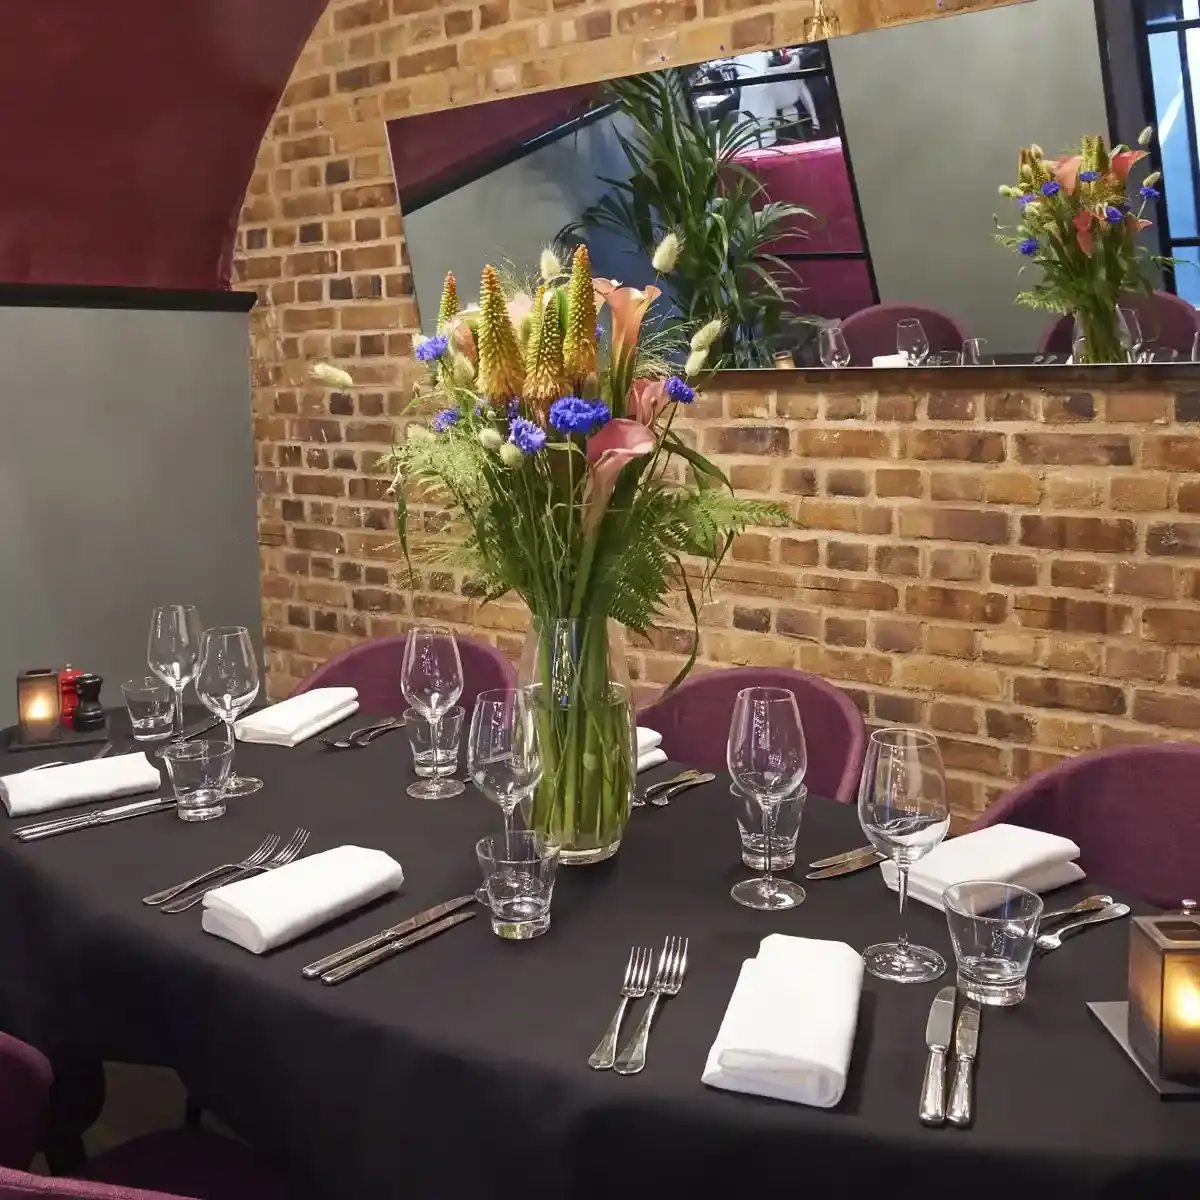 Table with purple chairs against a brick wall.